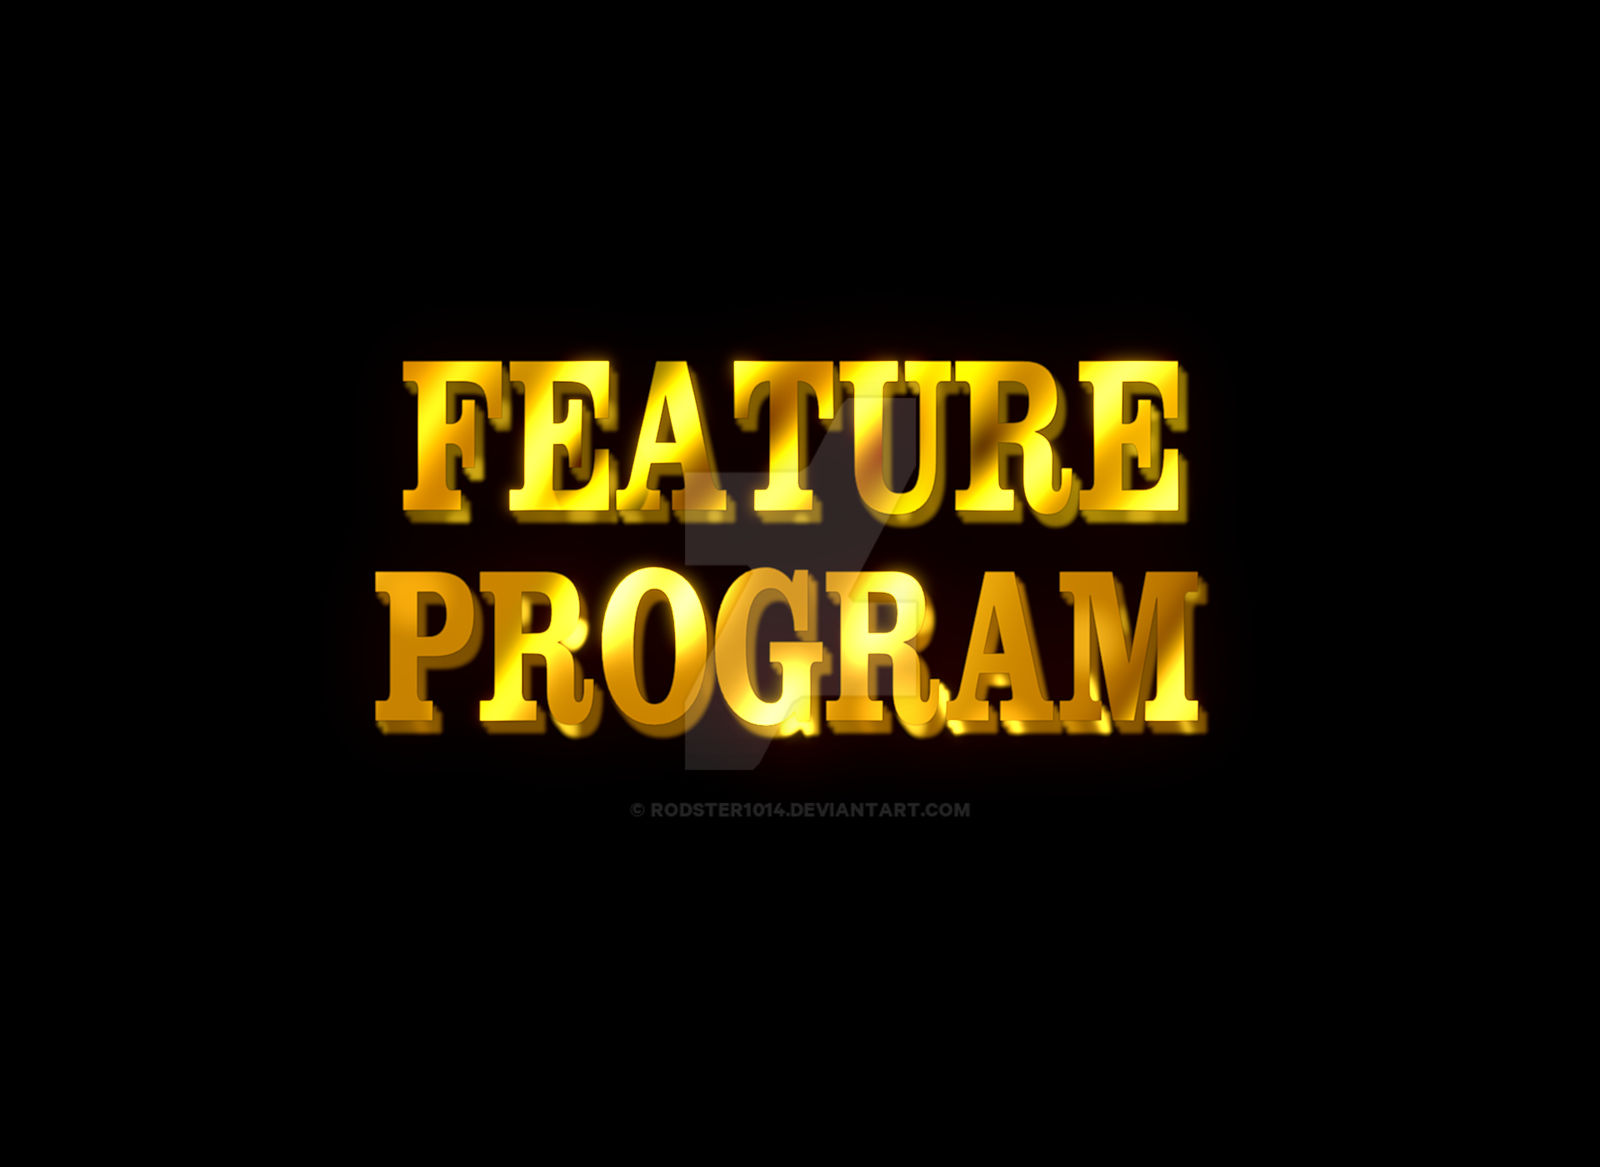 What If Feature Program Late 1980s Early 1990s By Rodster1014 On